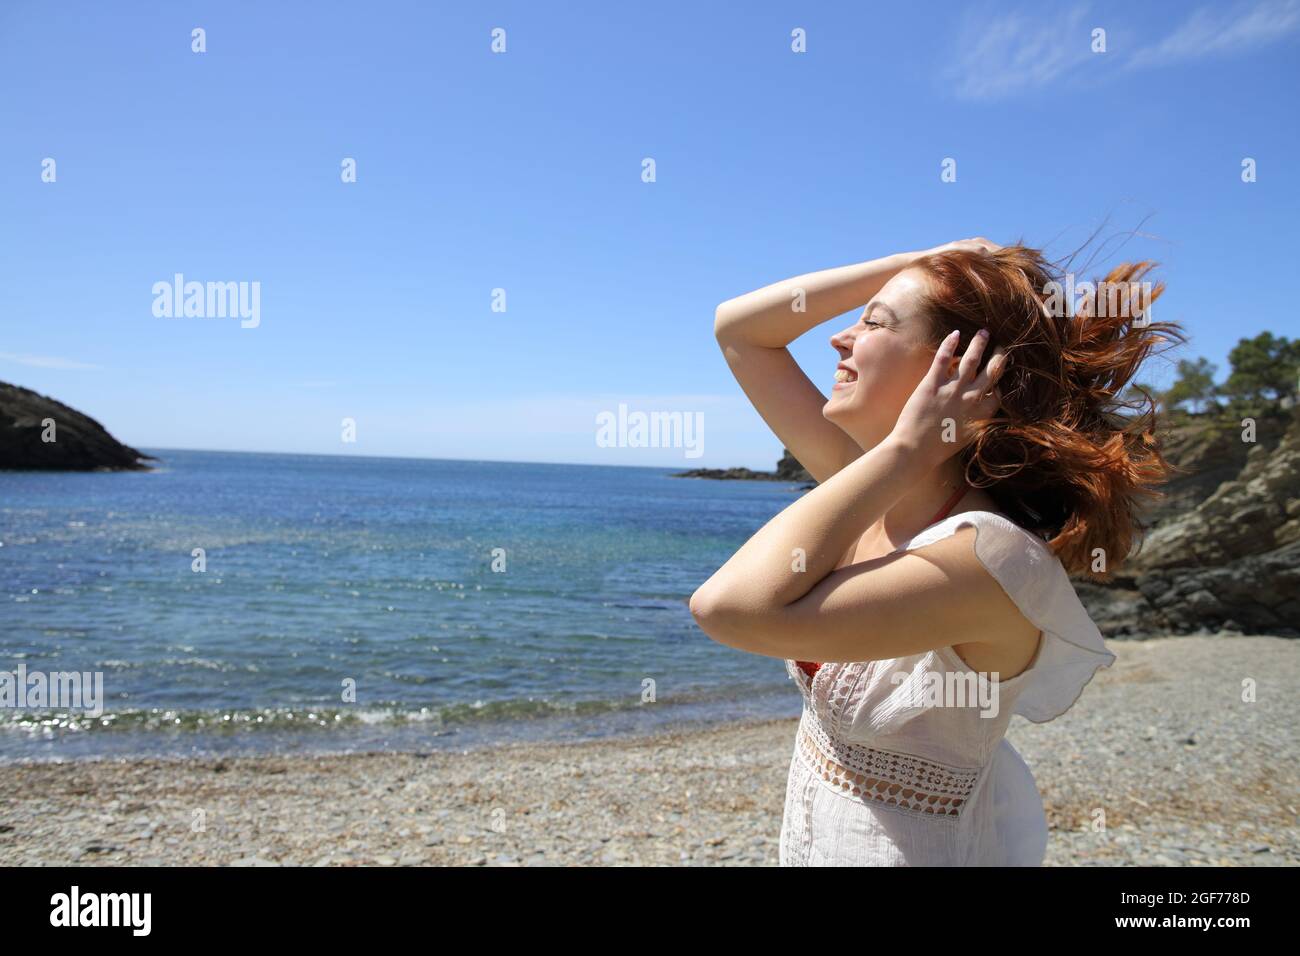 Happy woman touching tousled hair in a windy beach day on summer vacation Stock Photo